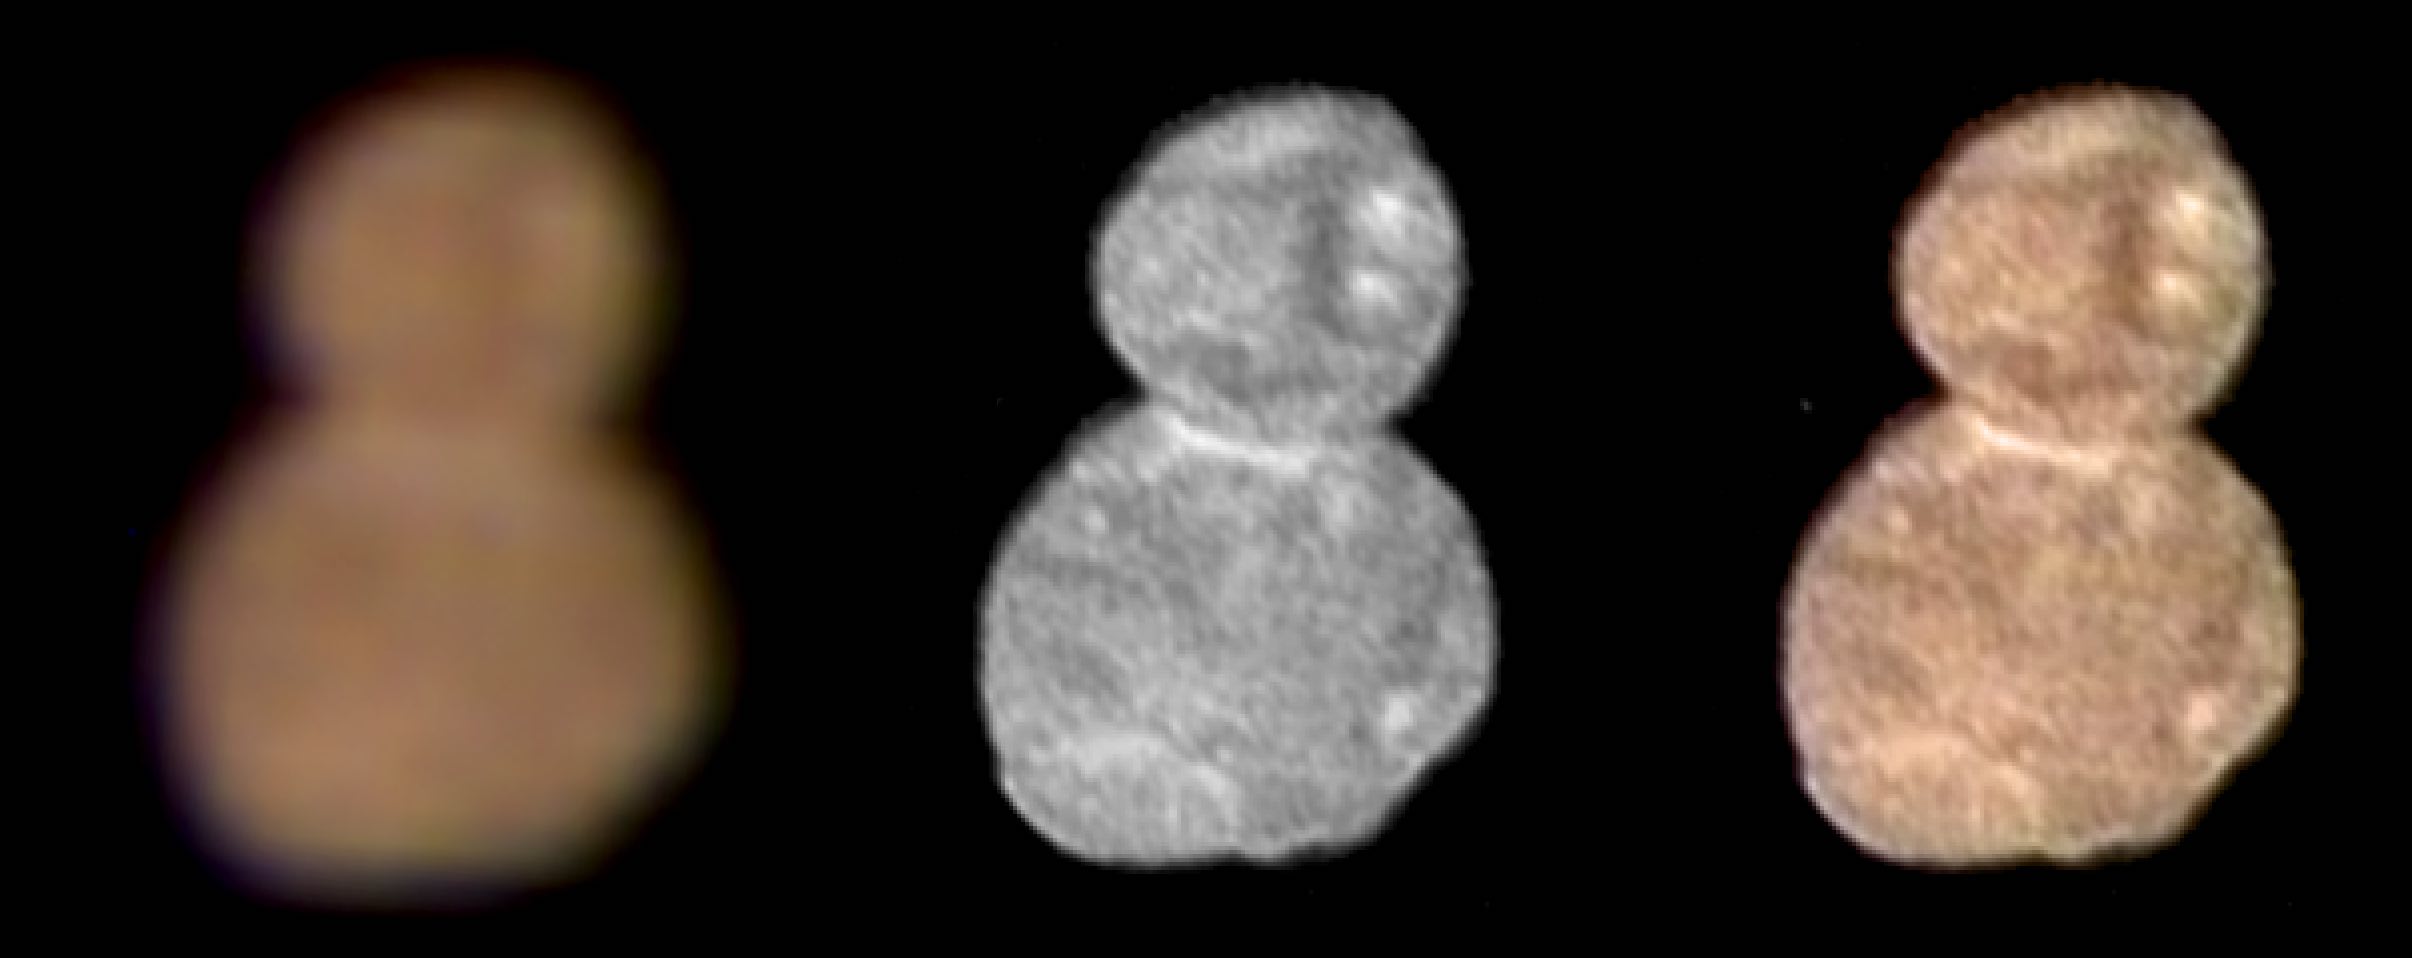 The first color image of Ultima Thule, taken at a distance of 85,000 miles (137,000 kilometers) at 0408 GMT on Jan. 1, 2019 (11:08 p.m. EST on Dec. 31), highlights its reddish surface. At left is an enhanced color image taken by the Multispectral Visible Imaging Camera (MVIC), produced by combining the near infrared, red and blue channels. The center image taken by the Long-Range Reconnaissance Imager (LORRI) has a higher spatial resolution than MVIC by approximately a factor of five. At right, the color has been overlaid onto the LORRI image to show the color uniformity of the Ultima and Thule lobes. Note the reduced red coloring at the neck of the object. Credit: NASA/SWRI/JHUAPL